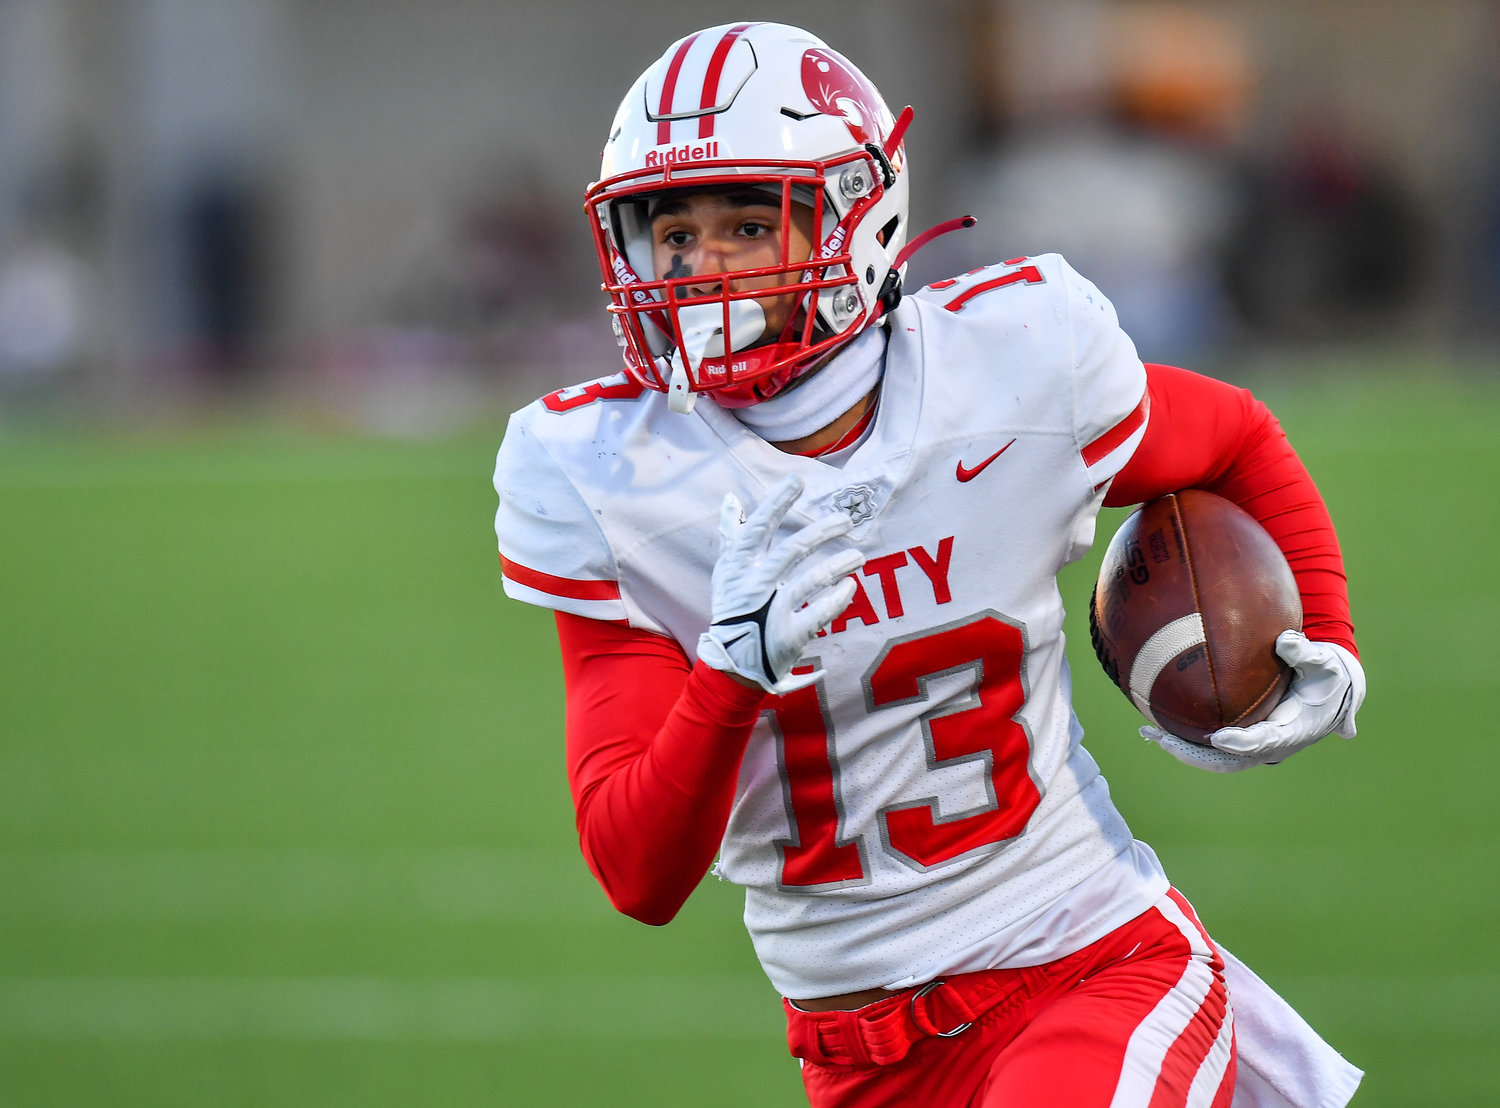 Katy, Tx. Nov 5, 2021: Katy's #13 Ronnie Schneider carries the ball during a conference game between Katy and Morton Ranch at Legacy Stadium in Katy. (Photo by Mark Goodman / Katy Times)